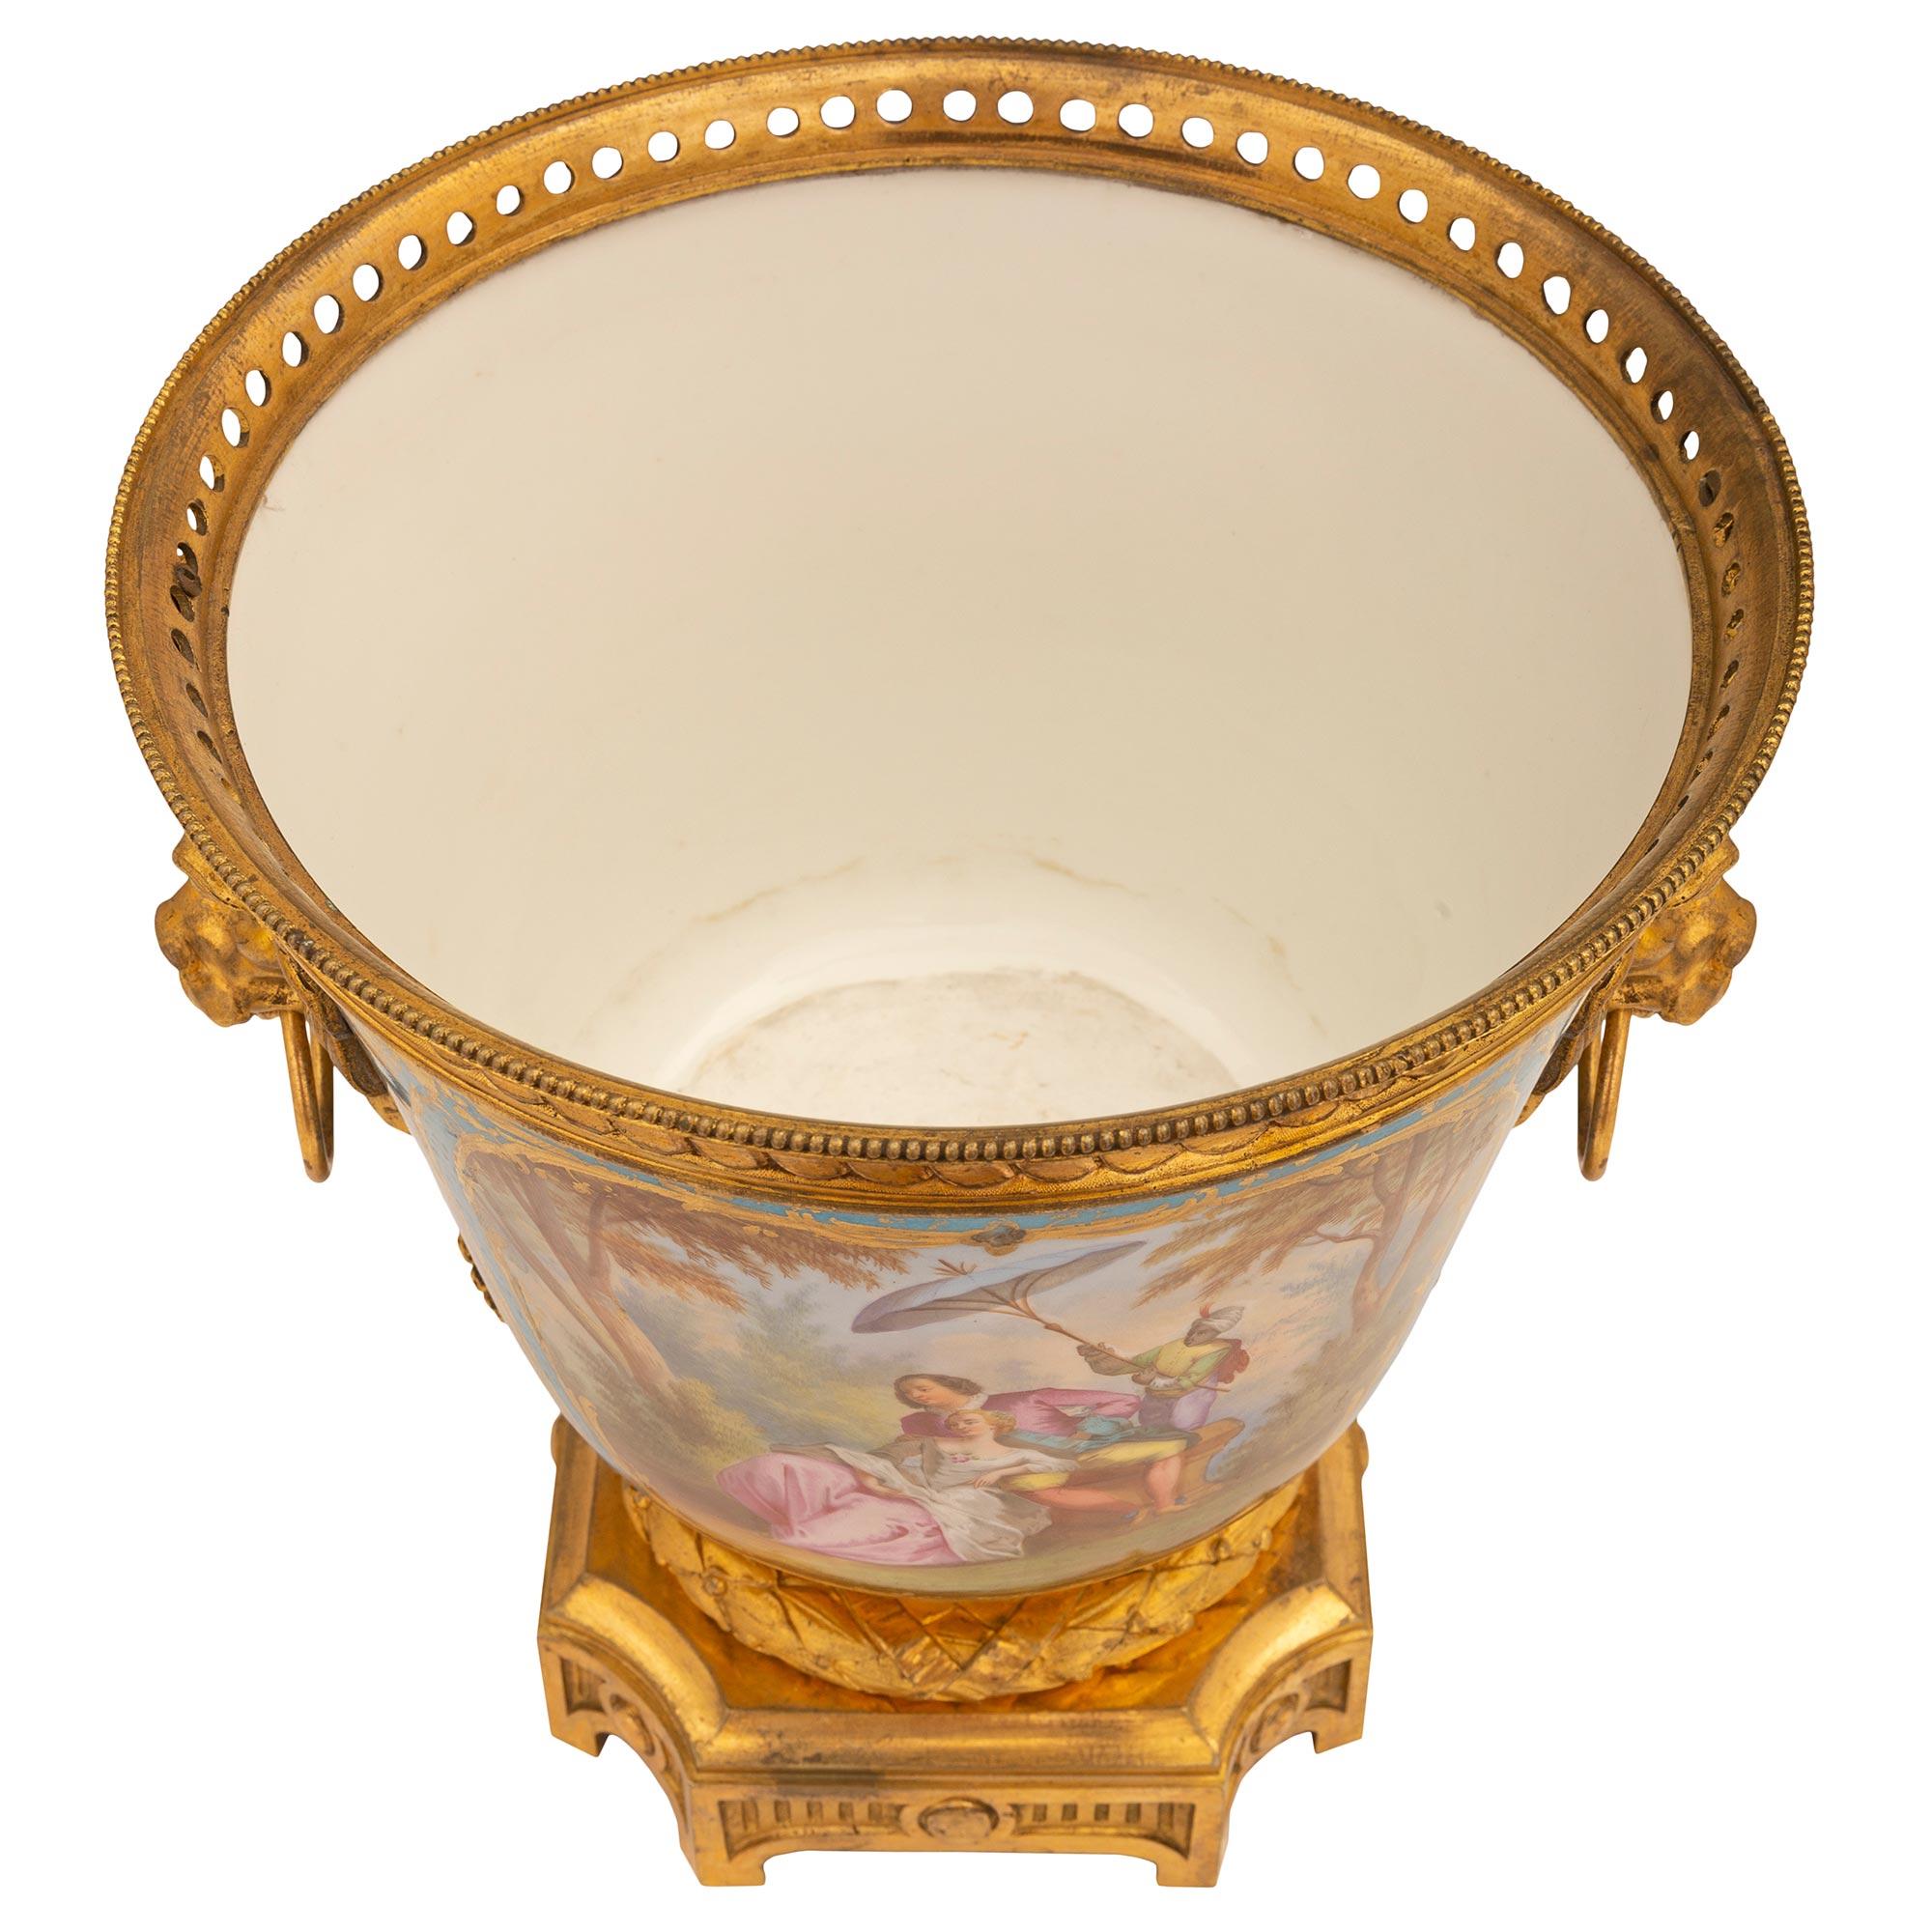 A charming and very high quality French 19th century Louis XVI st. Sèvres porcelain and ormolu vase/centerpiece. The centerpiece is raised by an elegant square base with concave corners, a lovely fluted design with recessed panels, a mottled border,